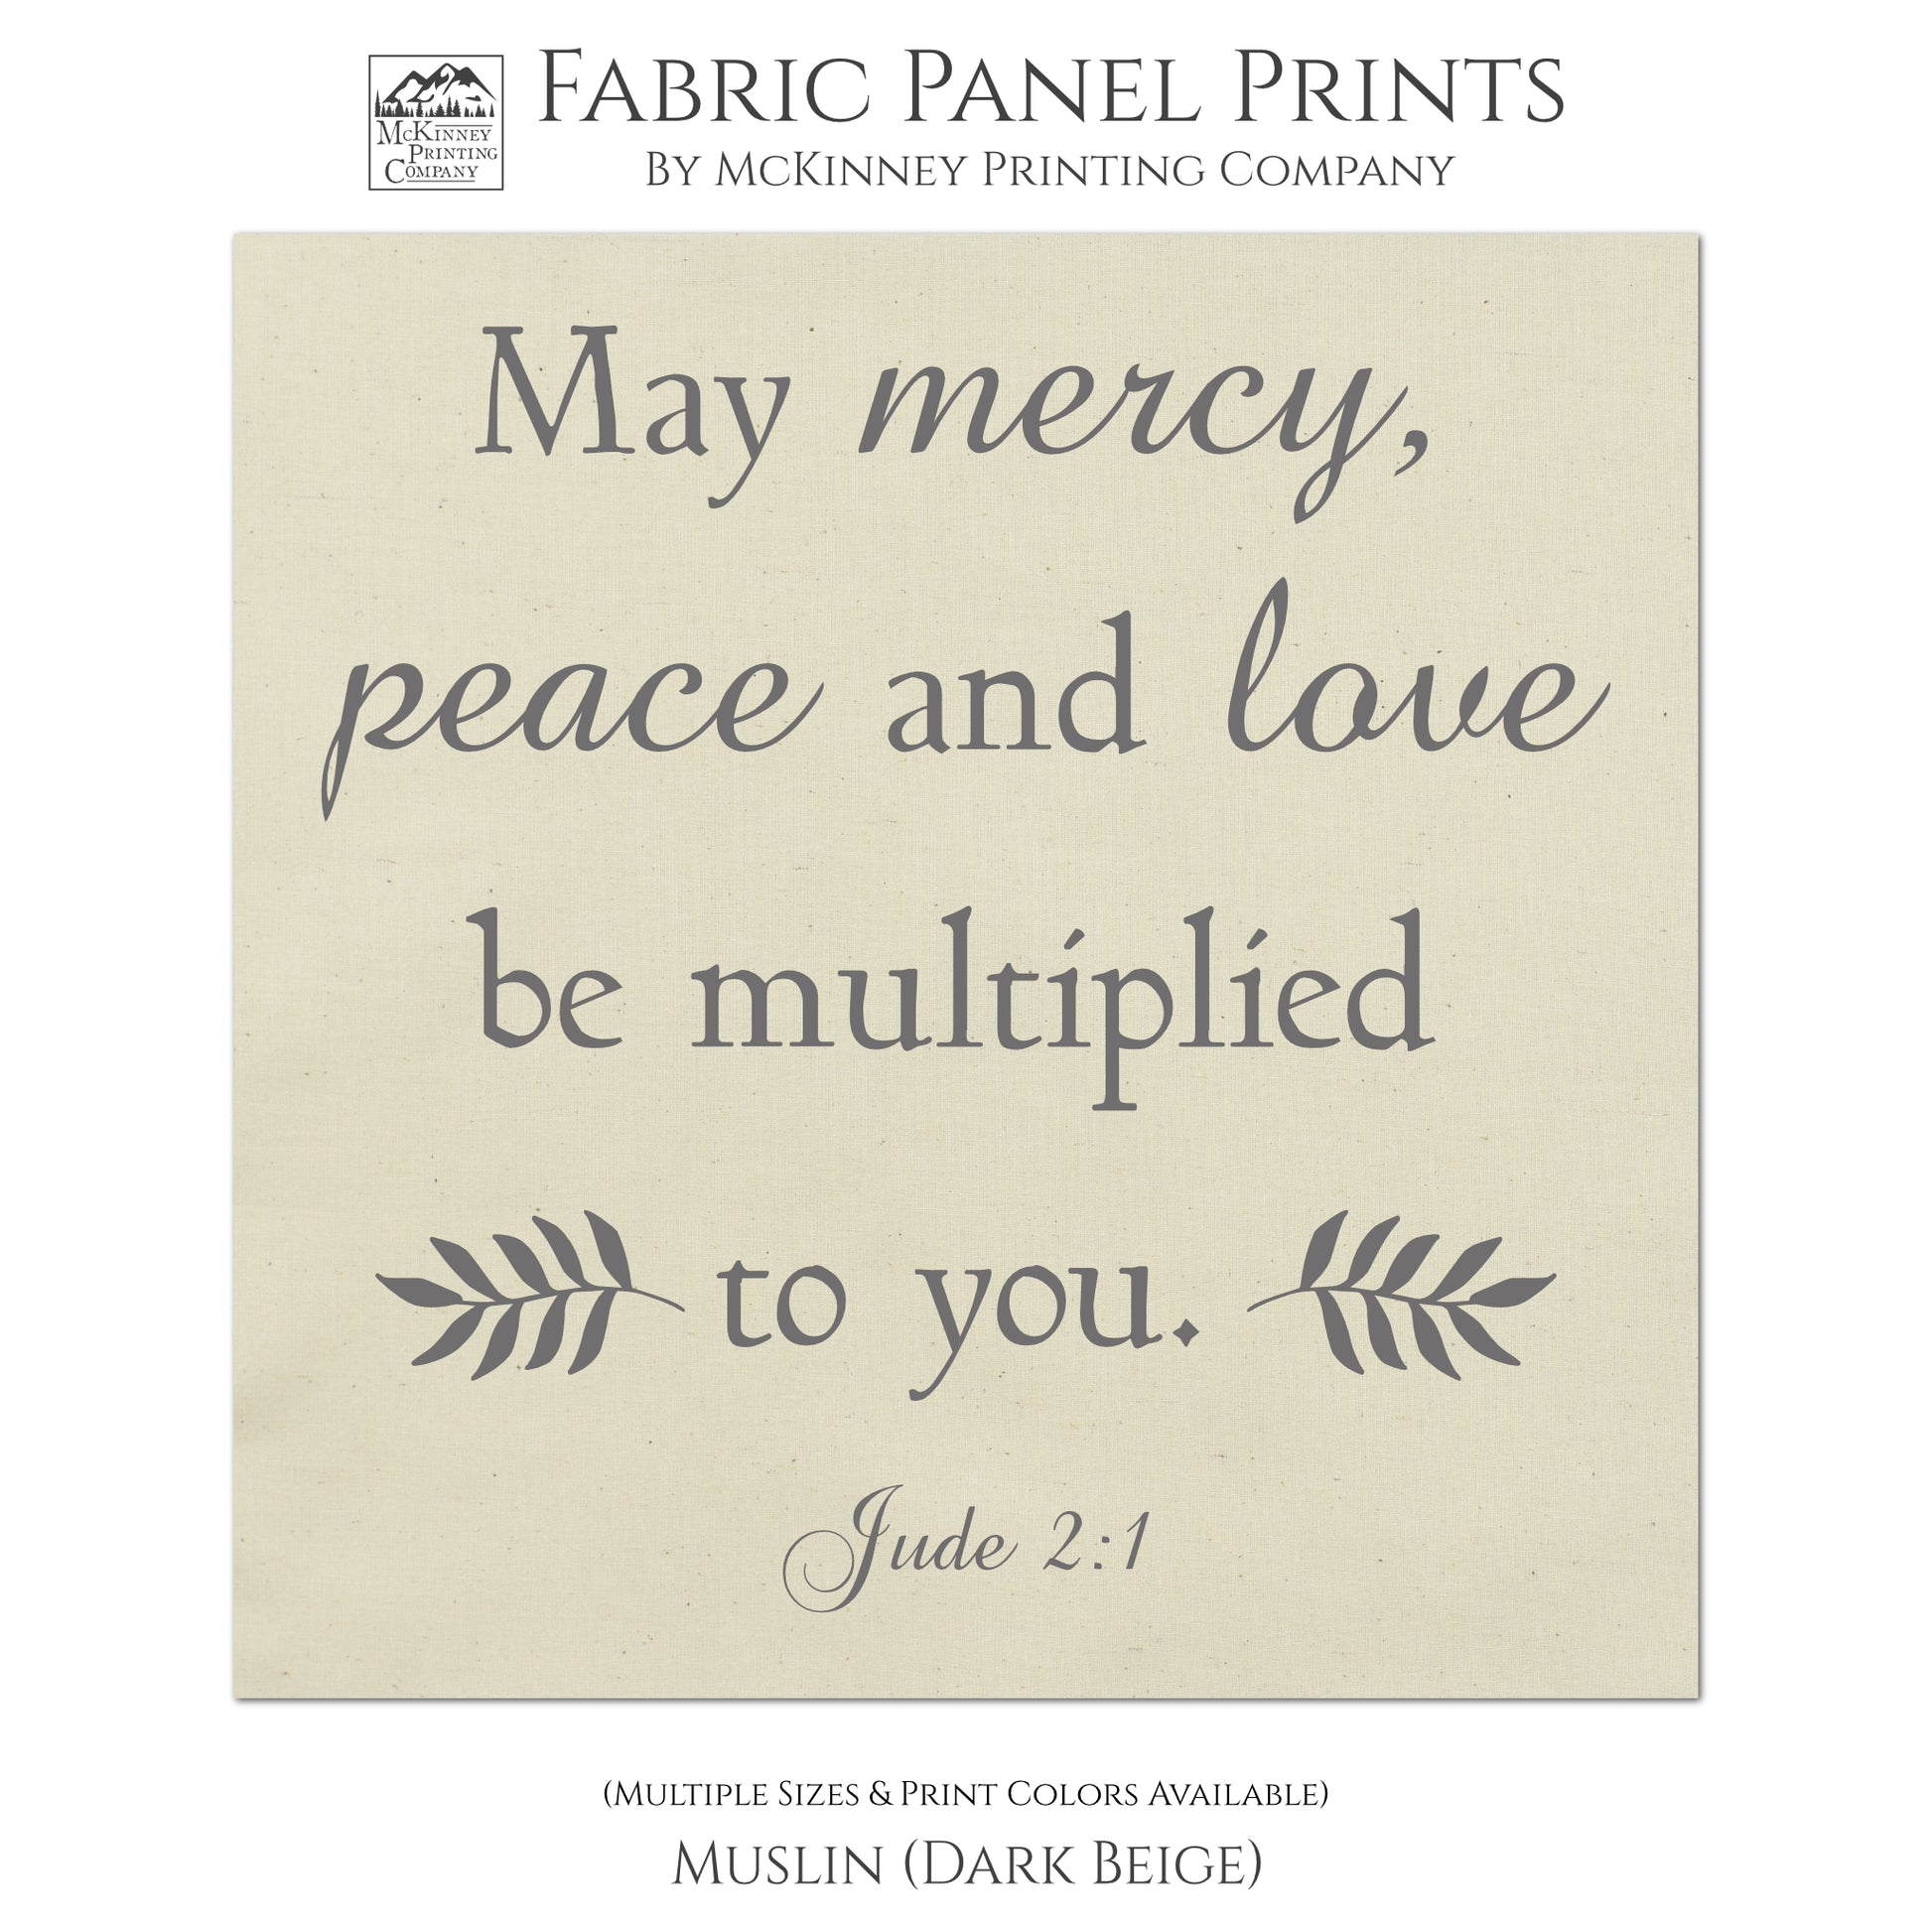 May mercy, peace and love be multiplied to you. Jude 2:1 - Religious Fabric, Christian Scripture, Large Quilt Block - Muslin